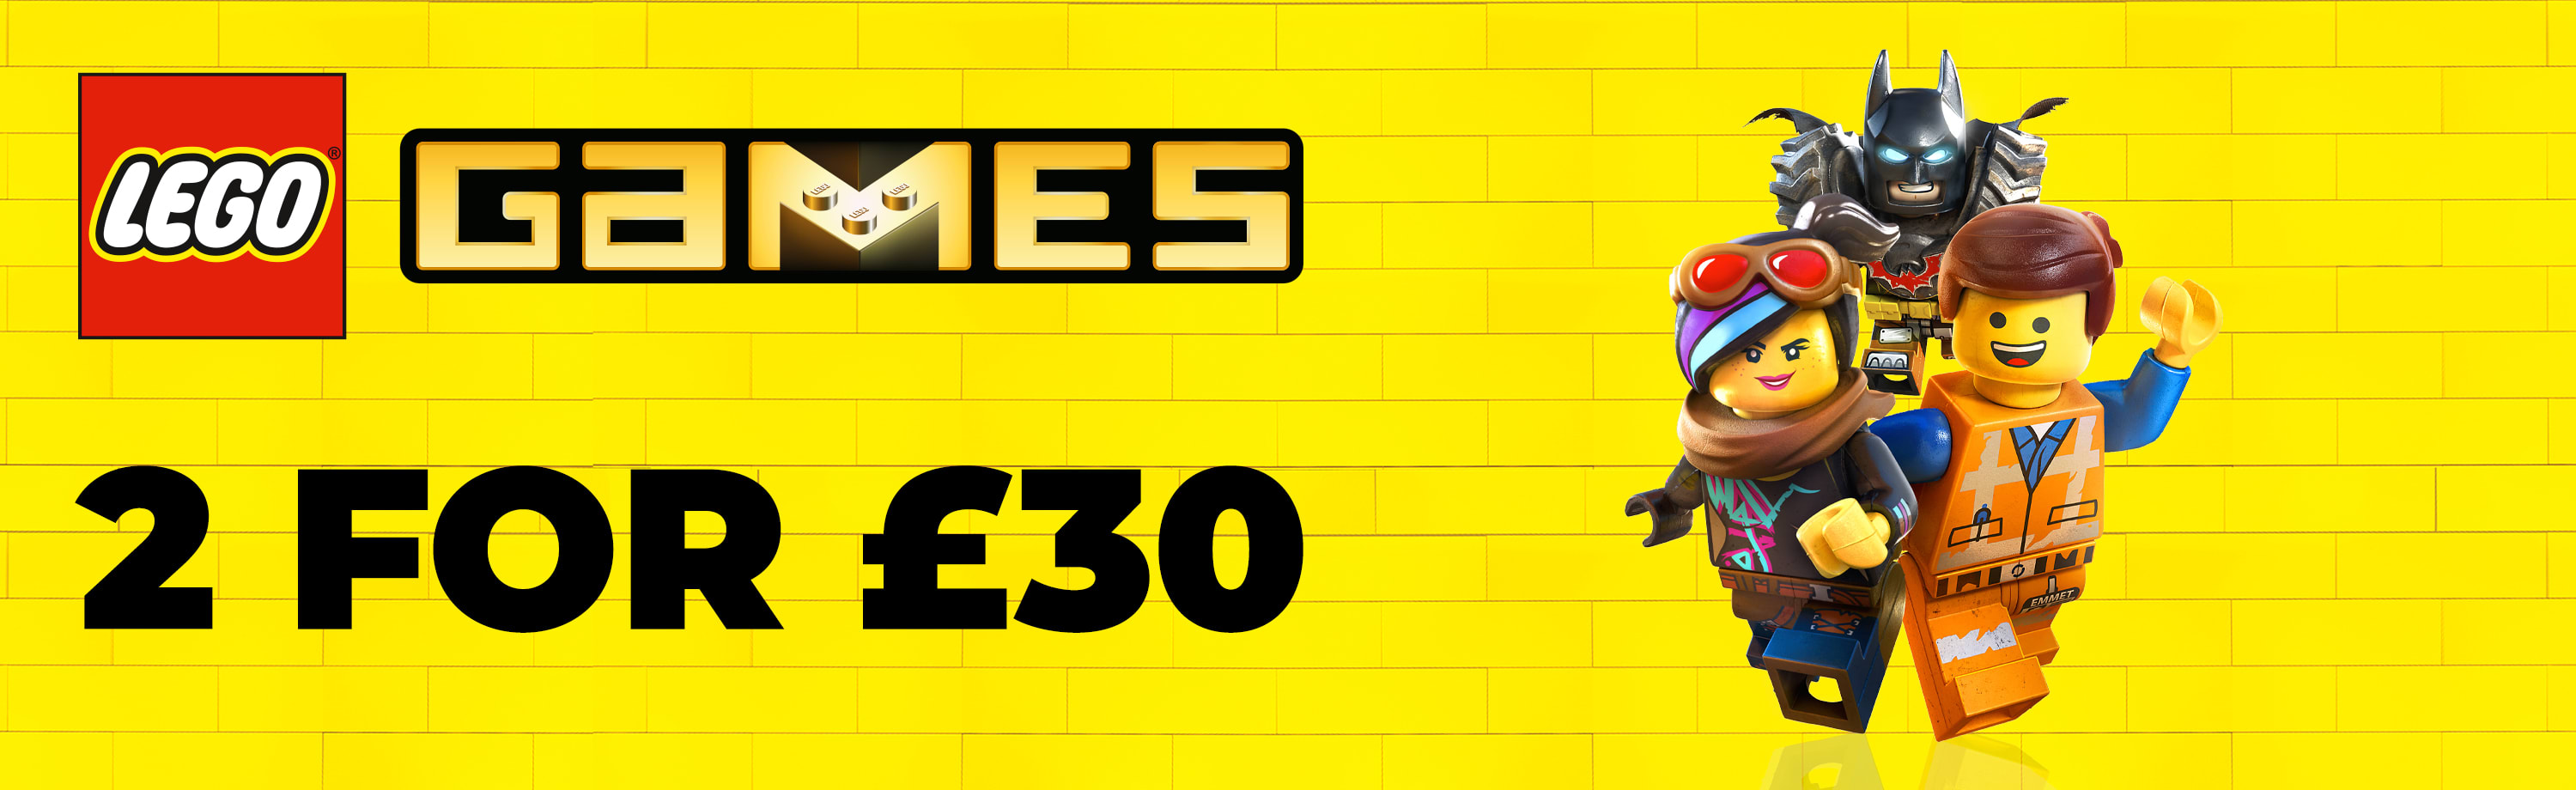 2 for £30 on selected LEGO titles